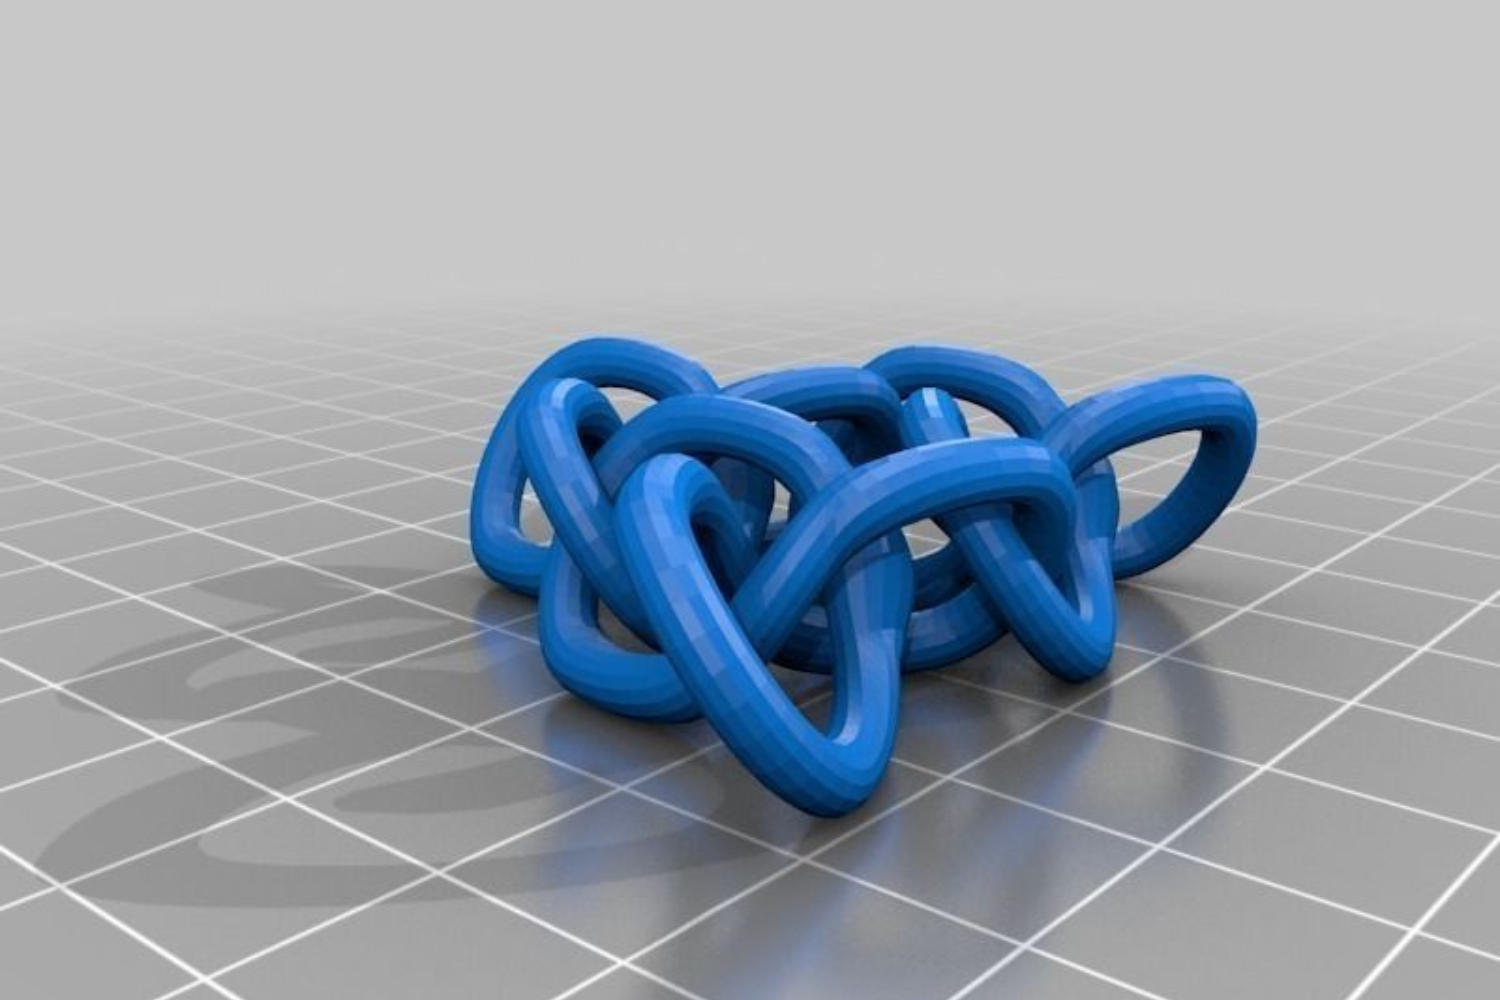 A 3D print of a torus knot in blue on a grey background